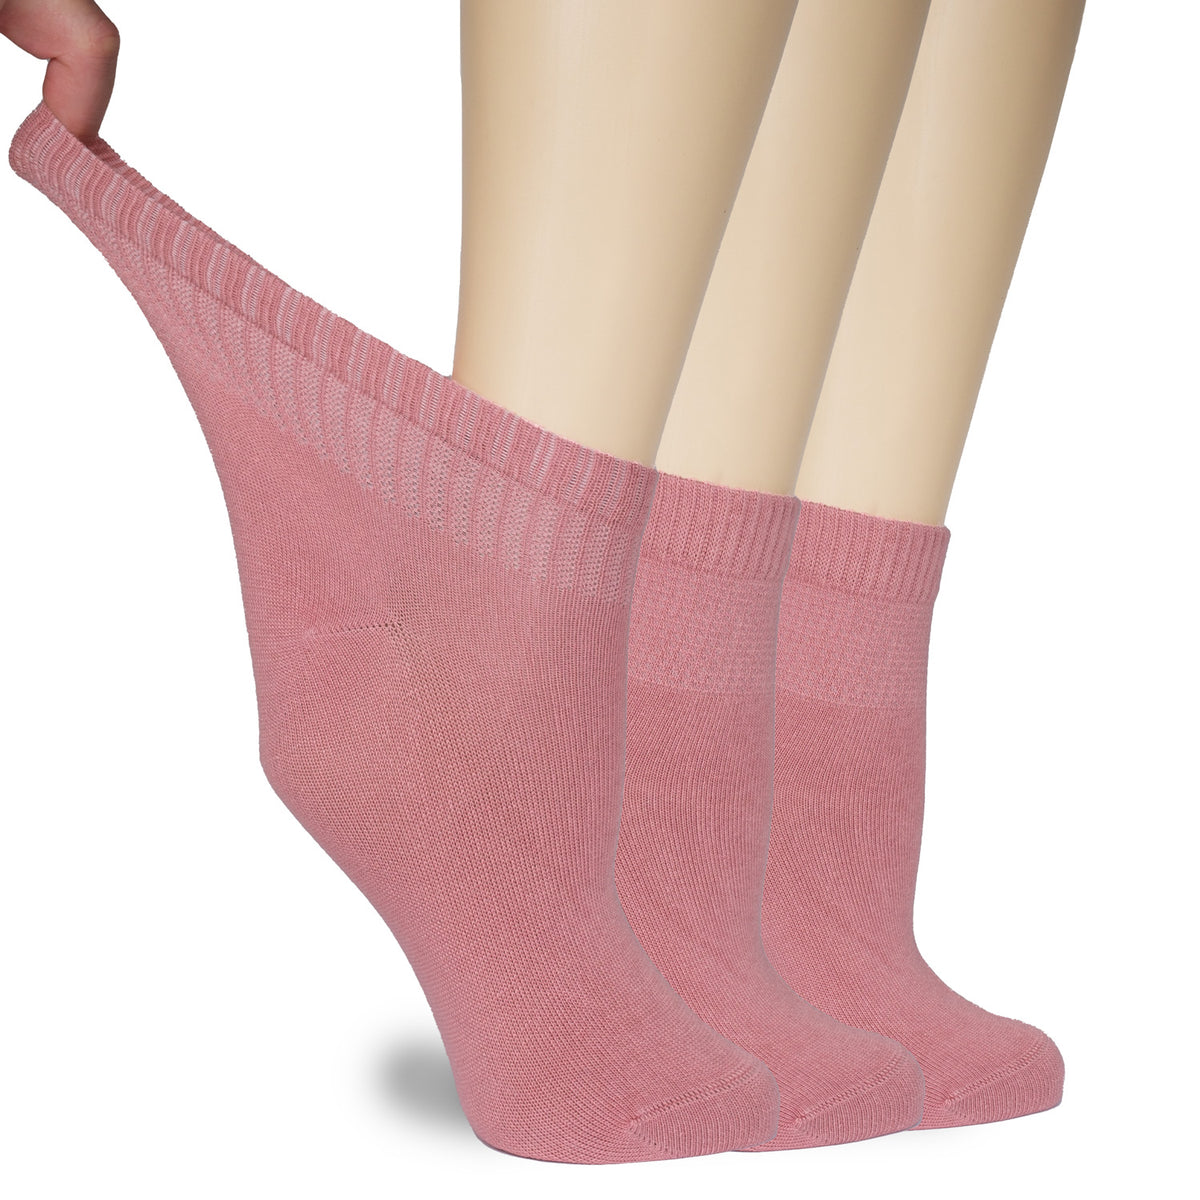 These Women's Diabetic Bamboo Ankle Socks in rose are seen on a woman's legs, offering a comfortable and supportive fit for those with diabetes.